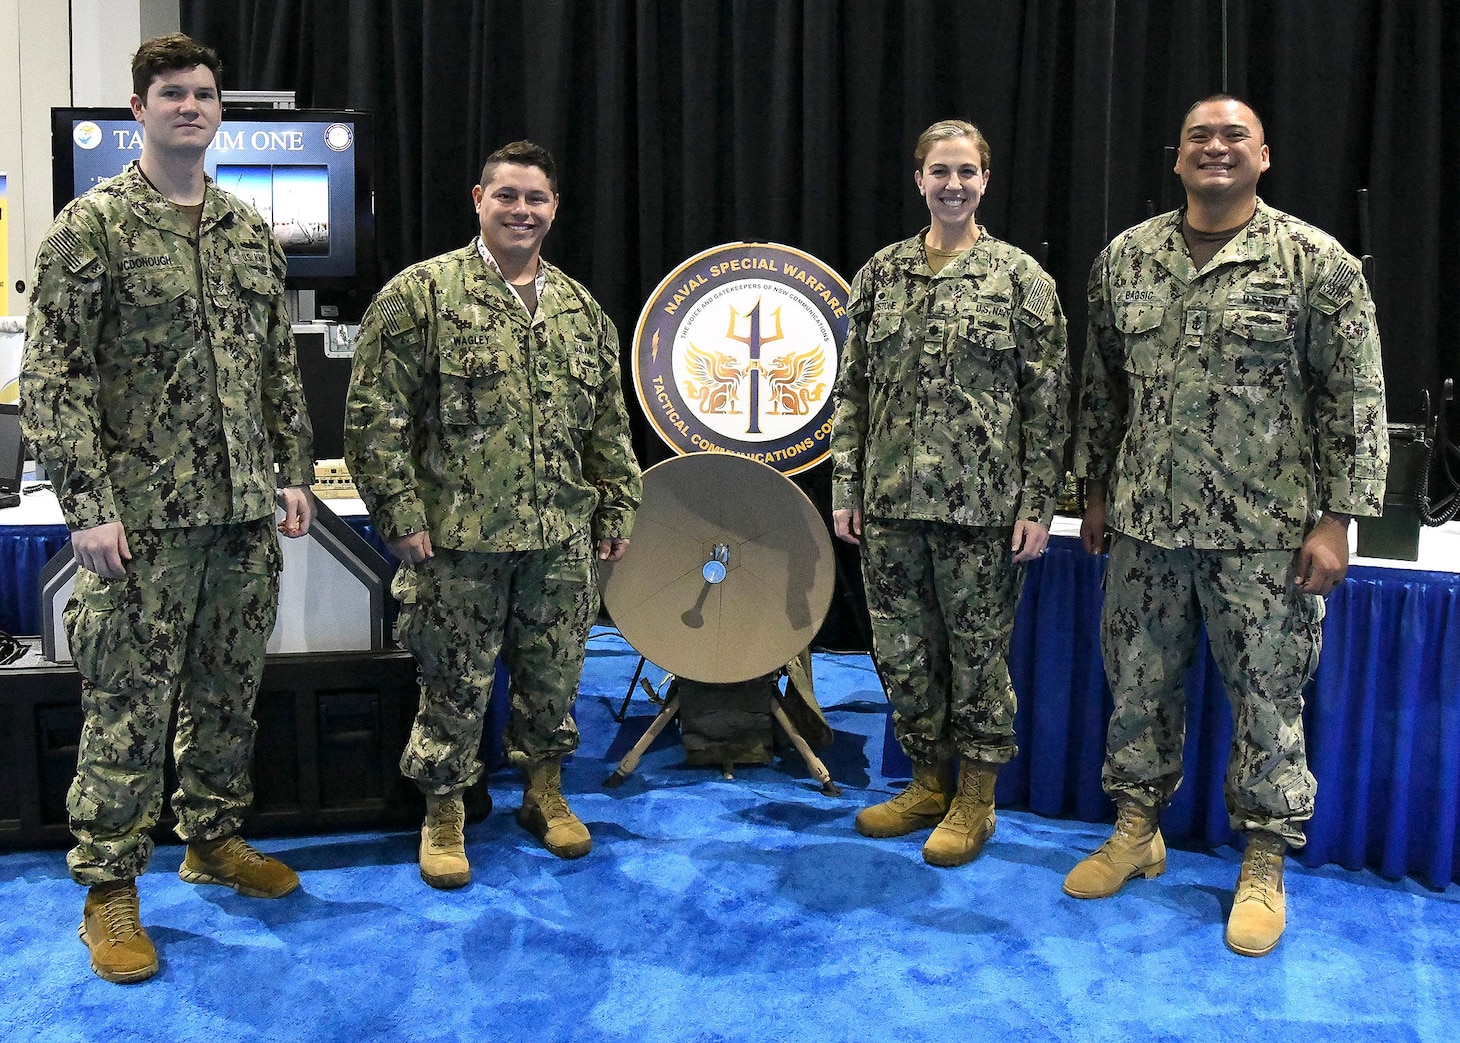 Cmdr. Blythe Blakistone, second from the right, commanding officer of Naval Special Warfare Tactical Communications Command (TCC) 1, and Sailors assigned to TCC-1 pose for a group photo at the Armed Forces Communications and Electronics Association-U.S. Naval Institute (AFCEA/USNI) West Convention.